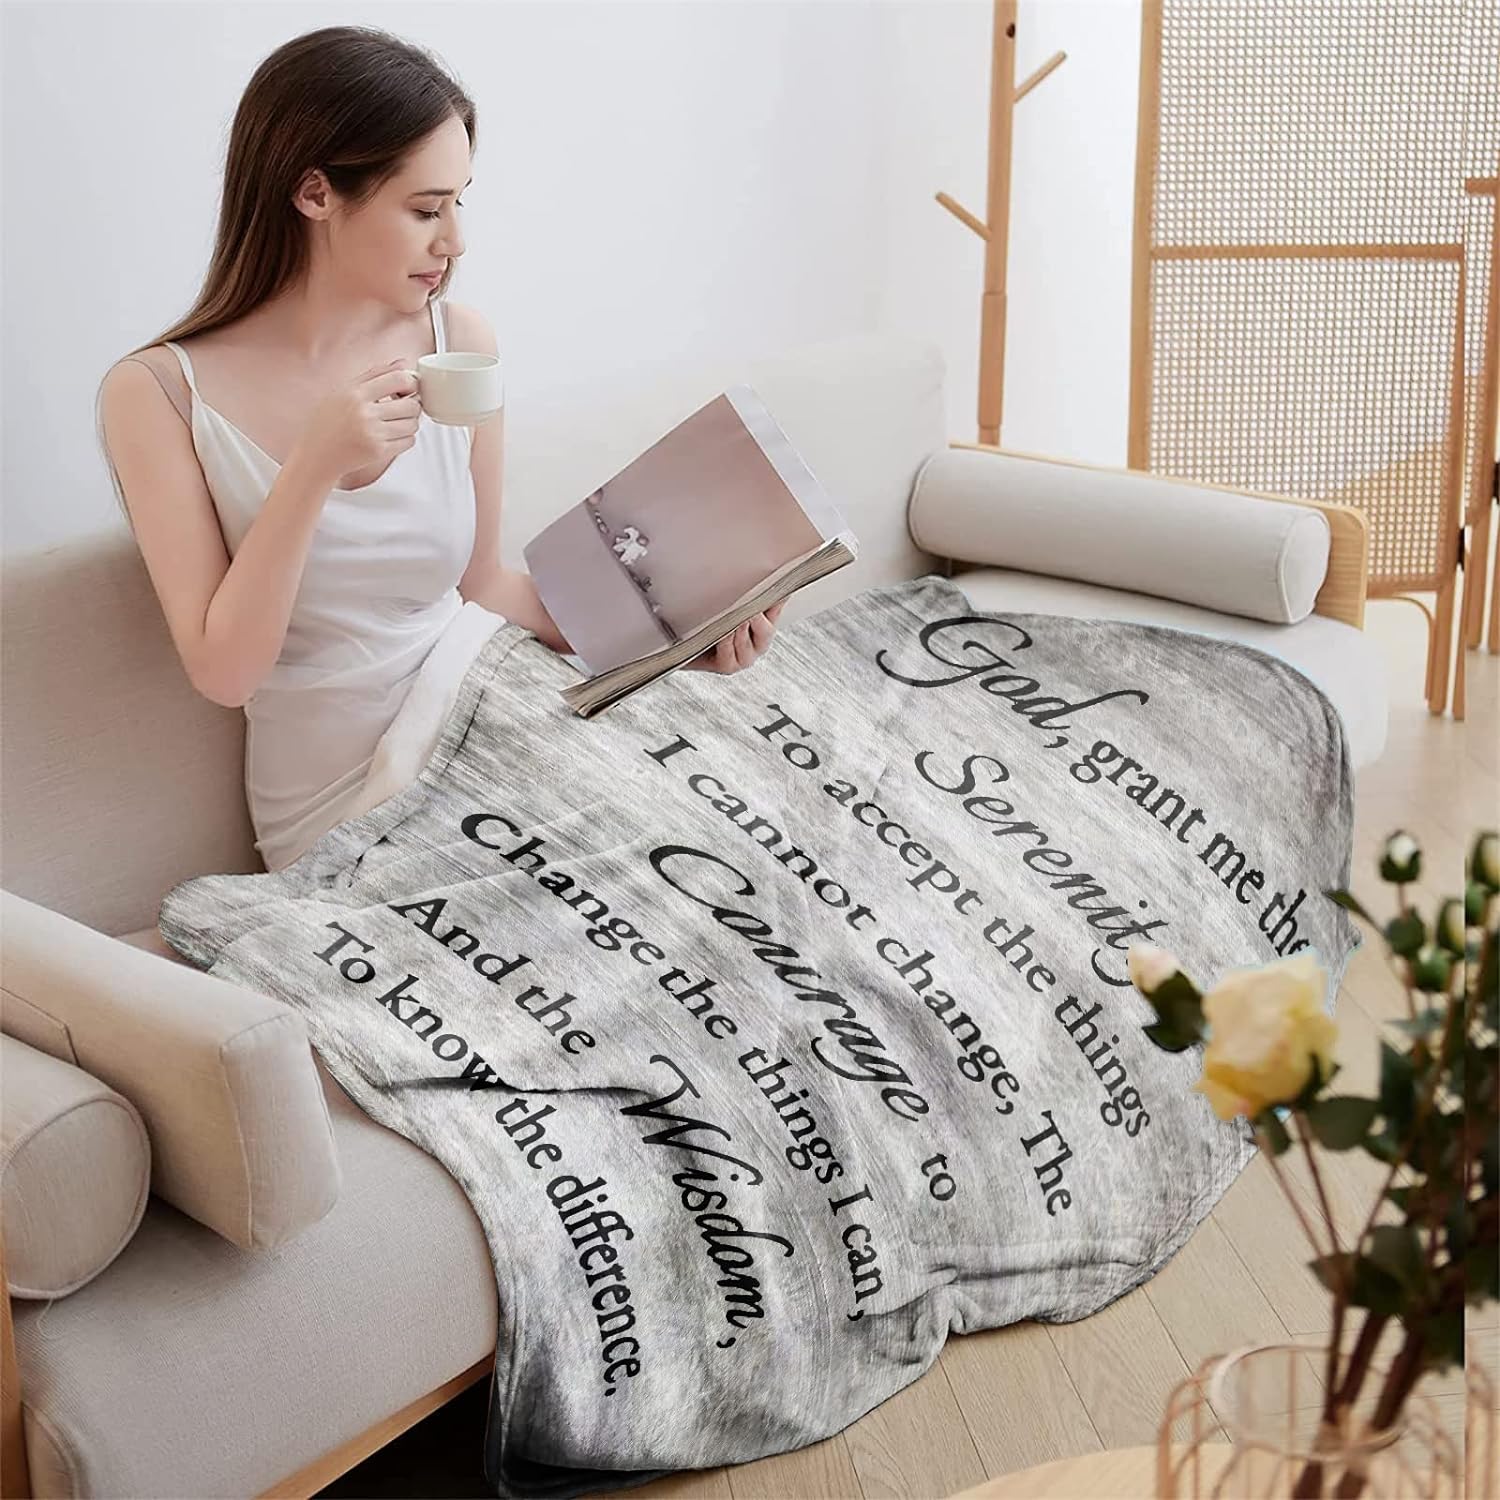 Great Choice Products Healing Throw Blanket With Inspirational Thoughts And Prayers- Religious Soft Throw Blanket Inspirational Blankets And Throws…